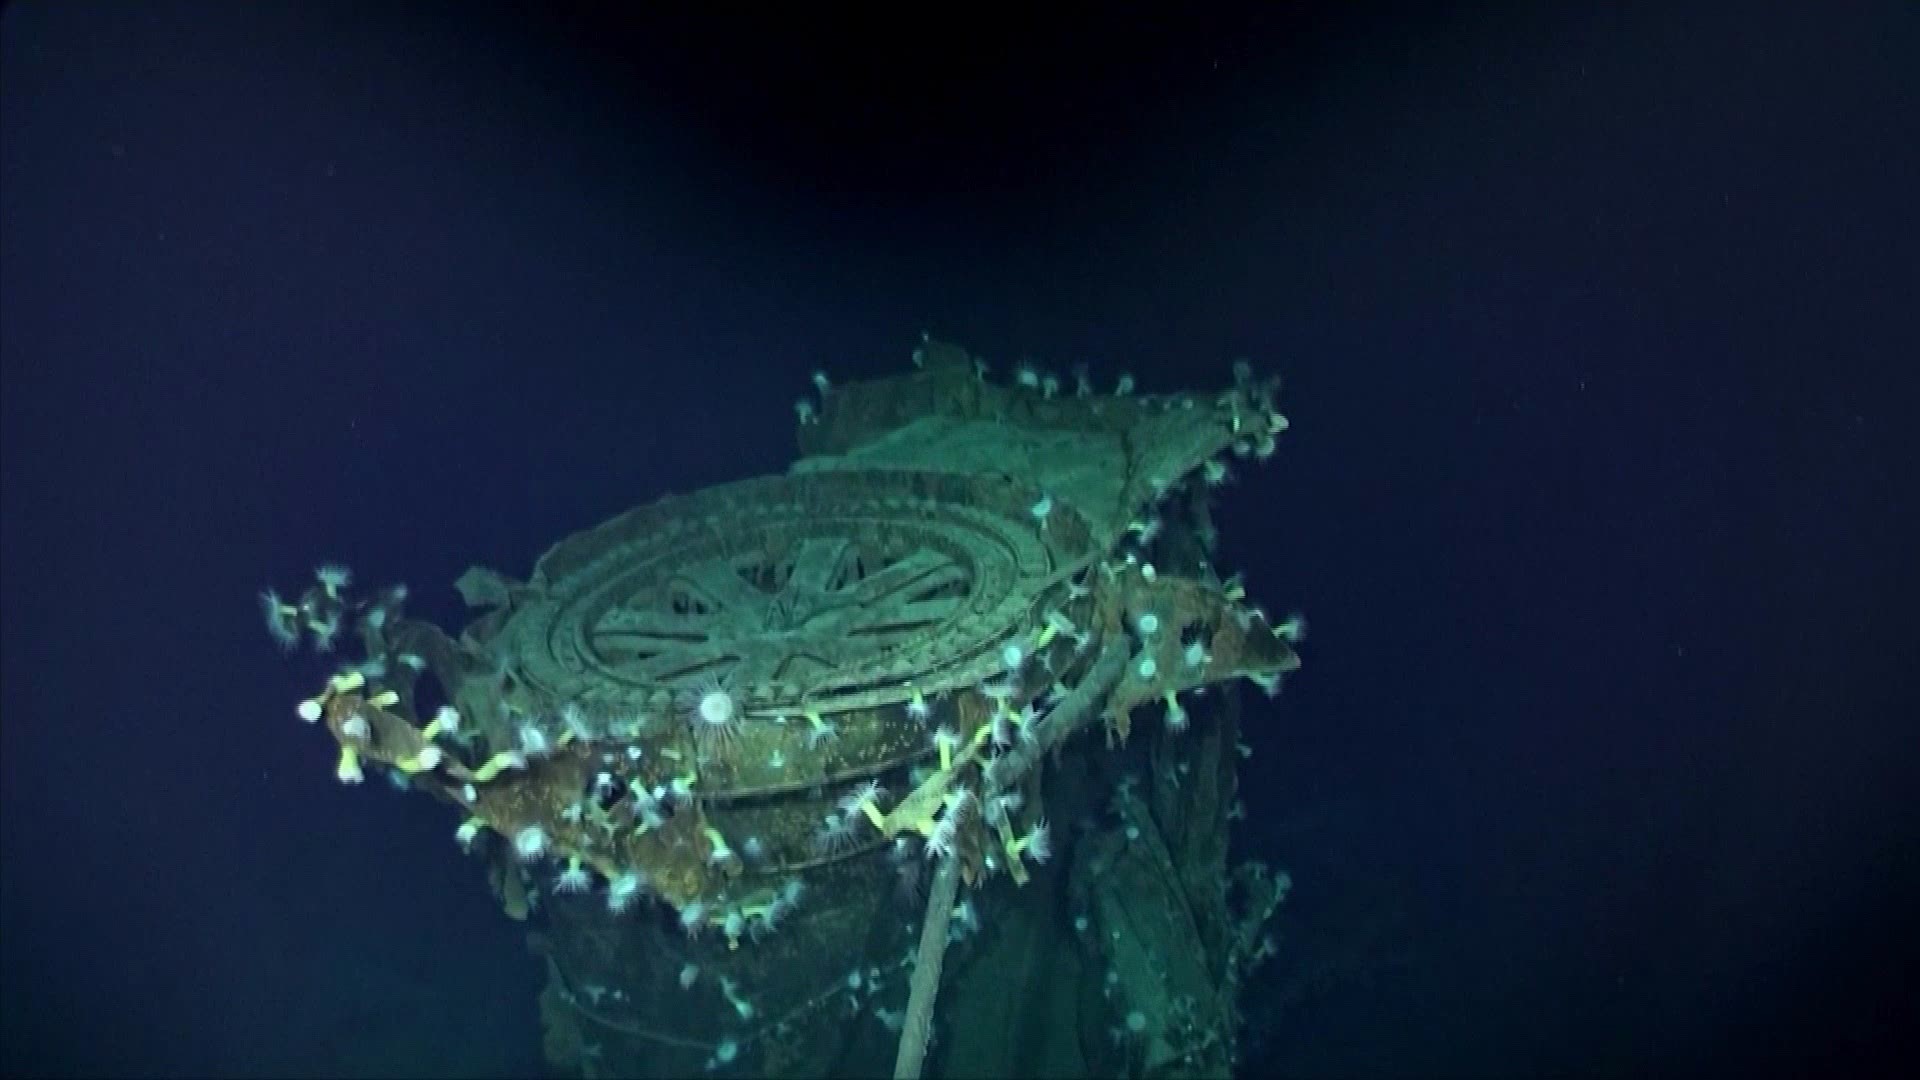 Deep-sea explorers uncover Japanese ship that sank during WWII. The remains of the Japanese aircraft carrier Kaga have been found for the first time since 1942.